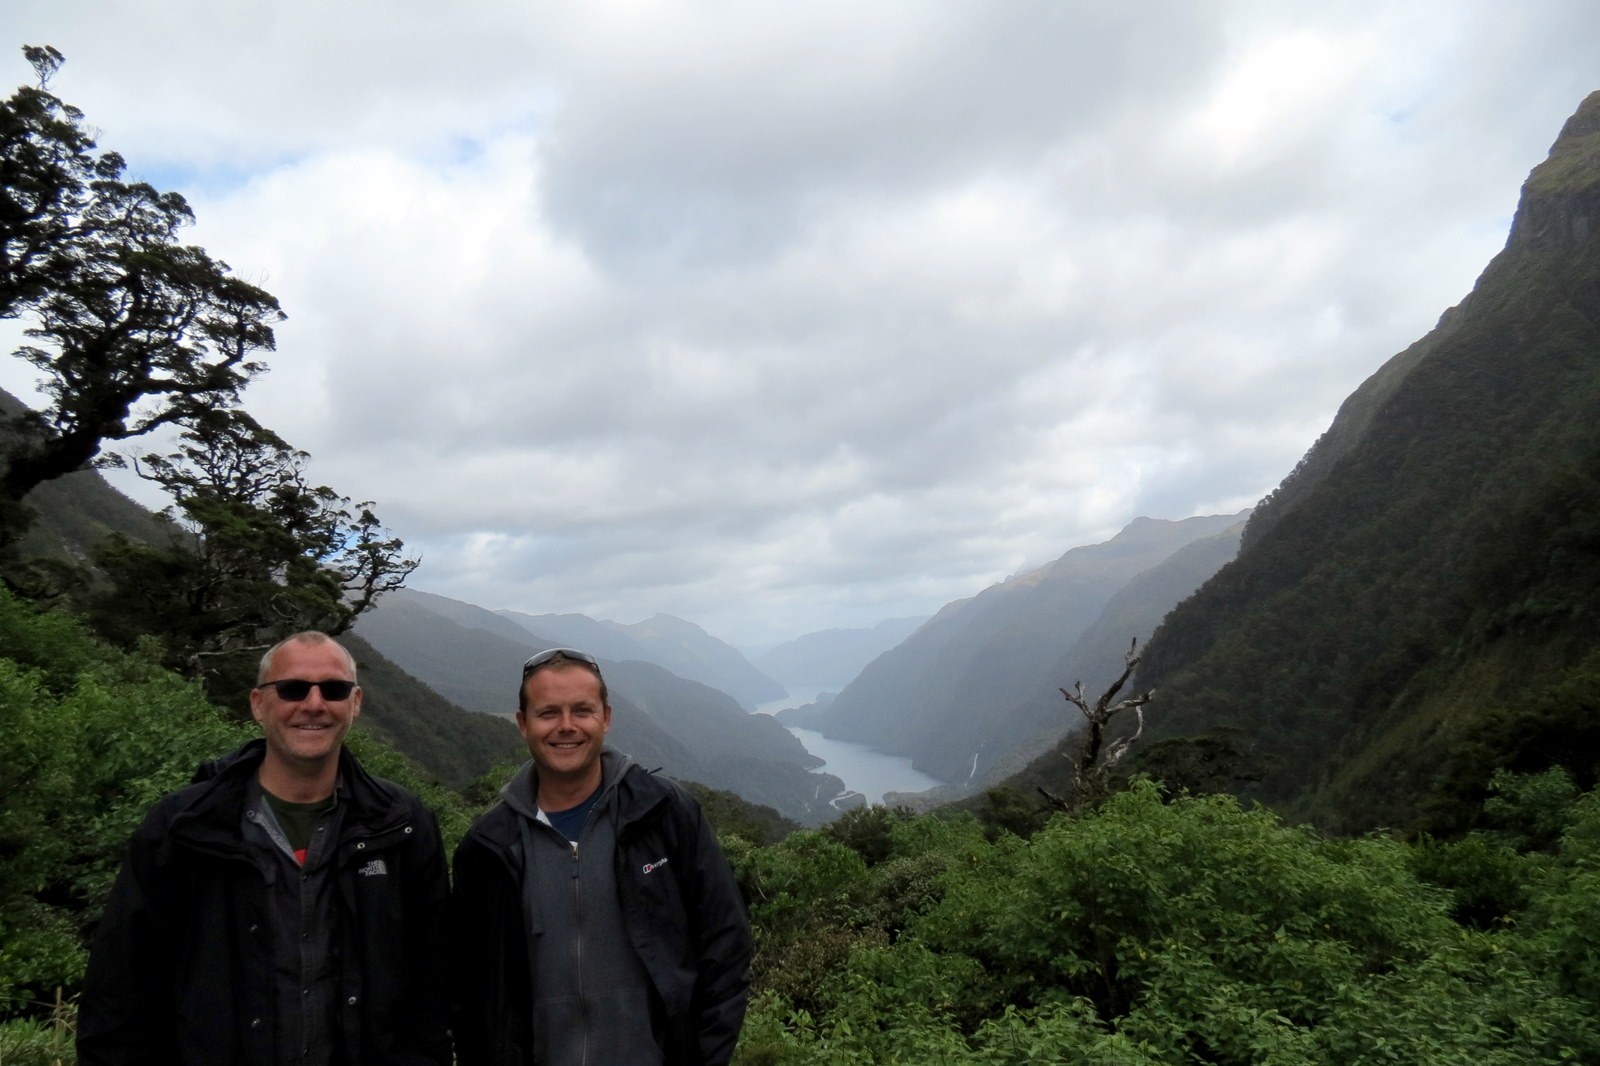 craig-and-john-doubtful-sound-lookout